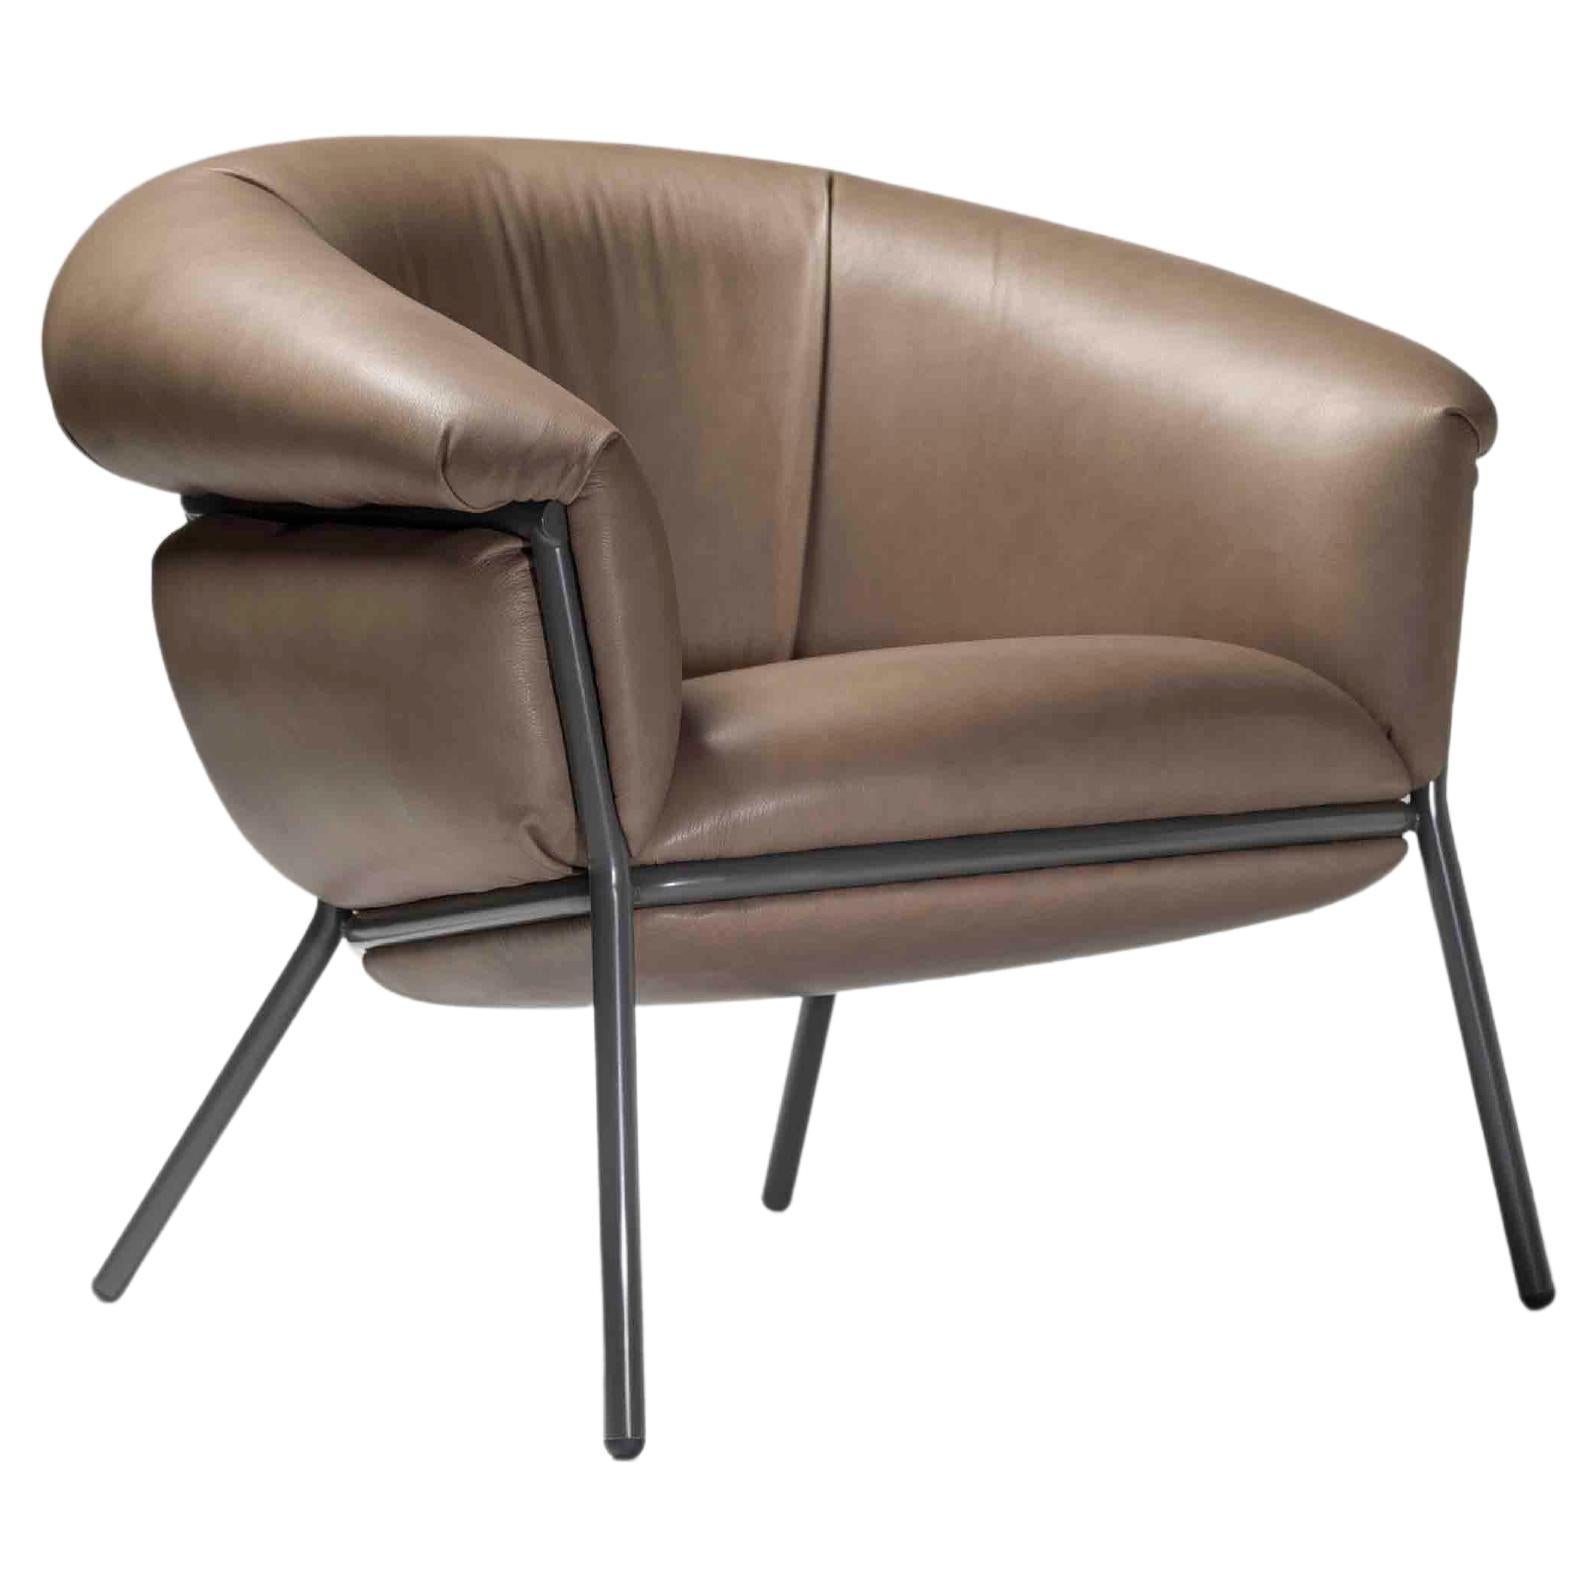 Grasso Armchair by Stephen Burks pale brown clay leather painted brown stucture For Sale